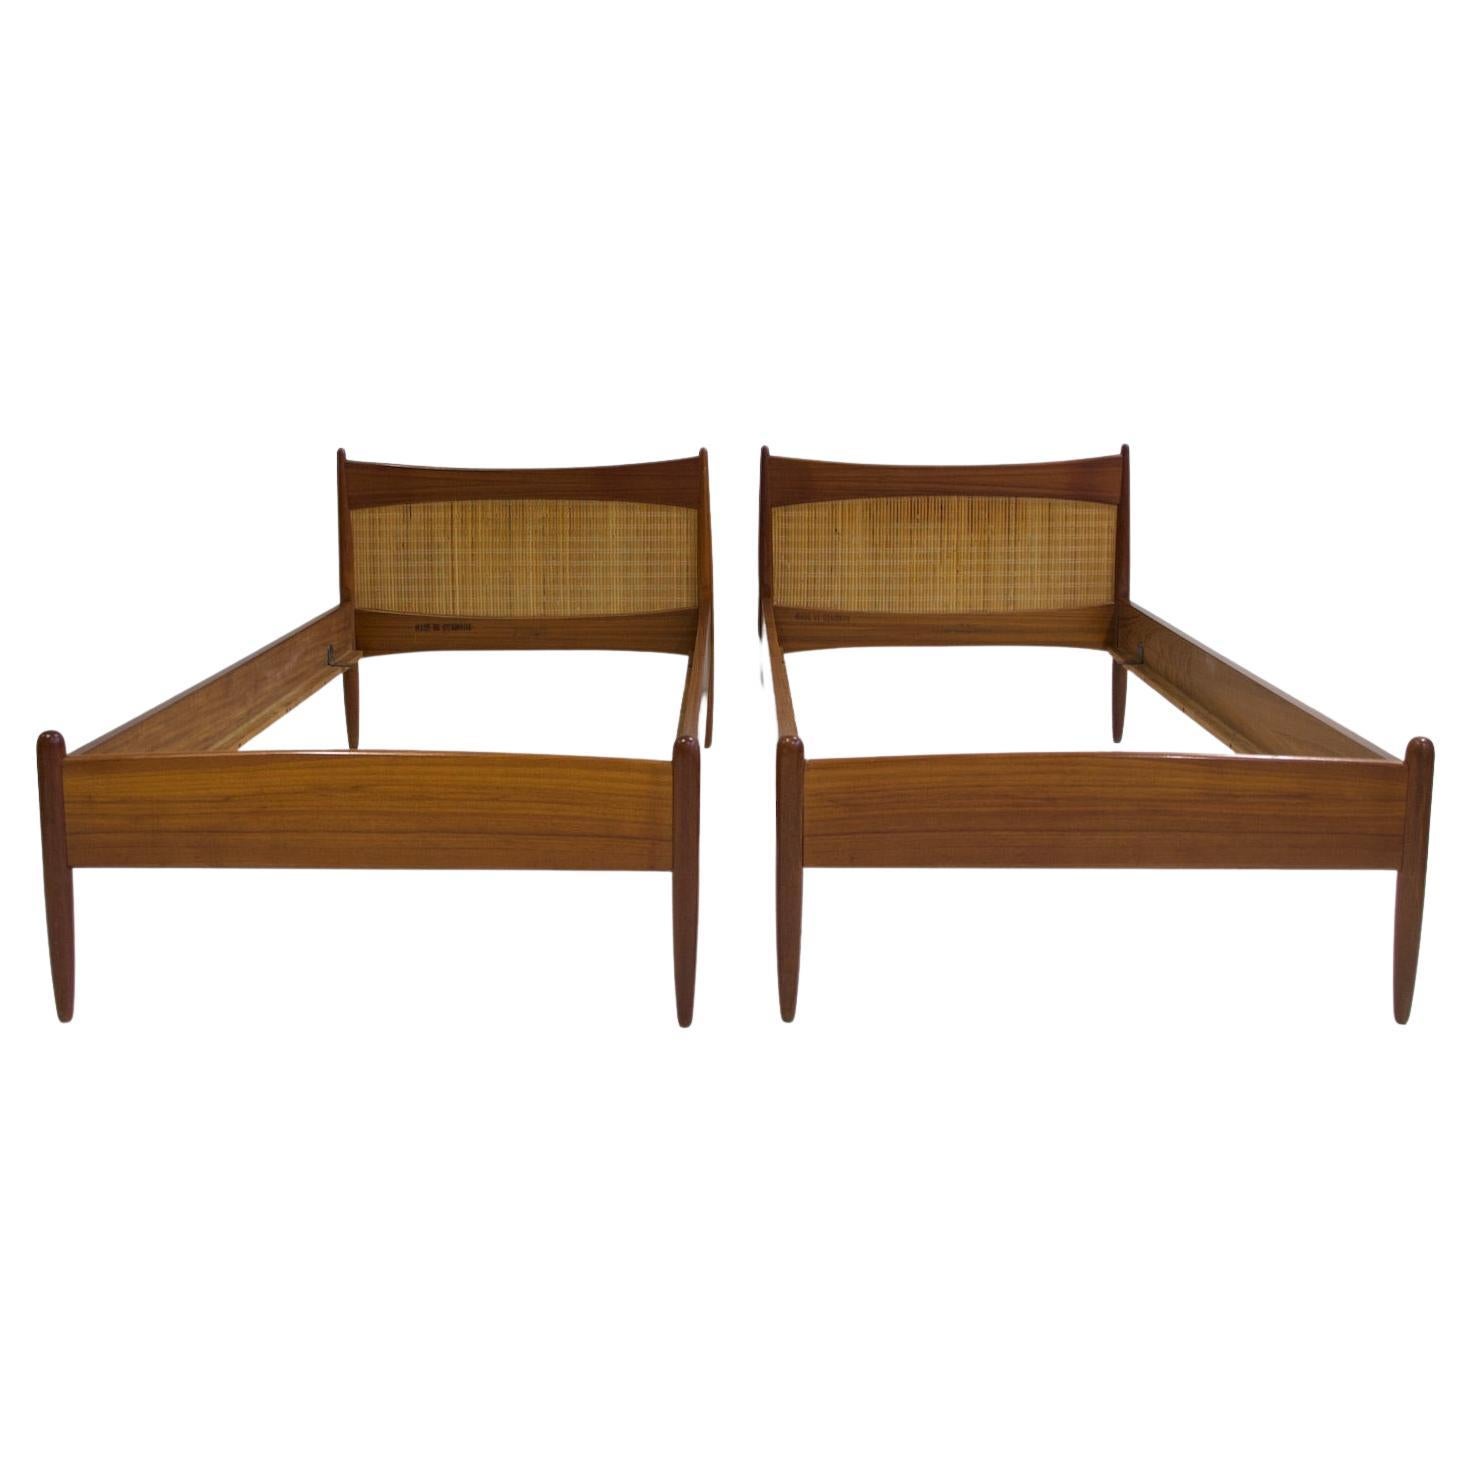 Pair of Teak and Rattan Bed Frames by Børge Mogensen For Sale